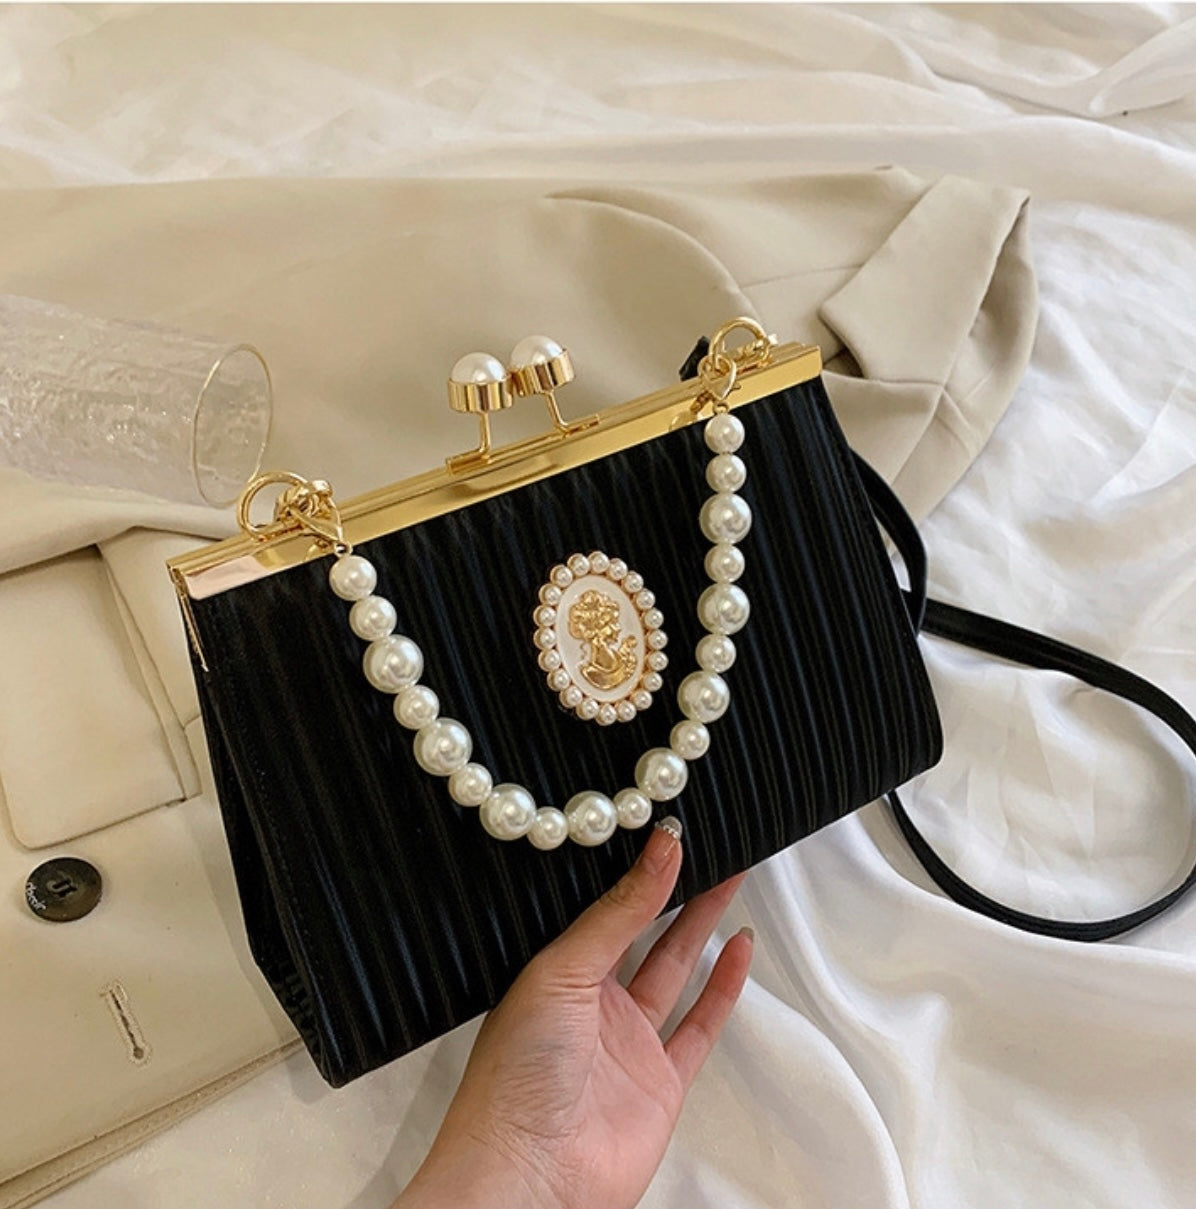 “Queen Of England” (Pearl Clutch Purse)